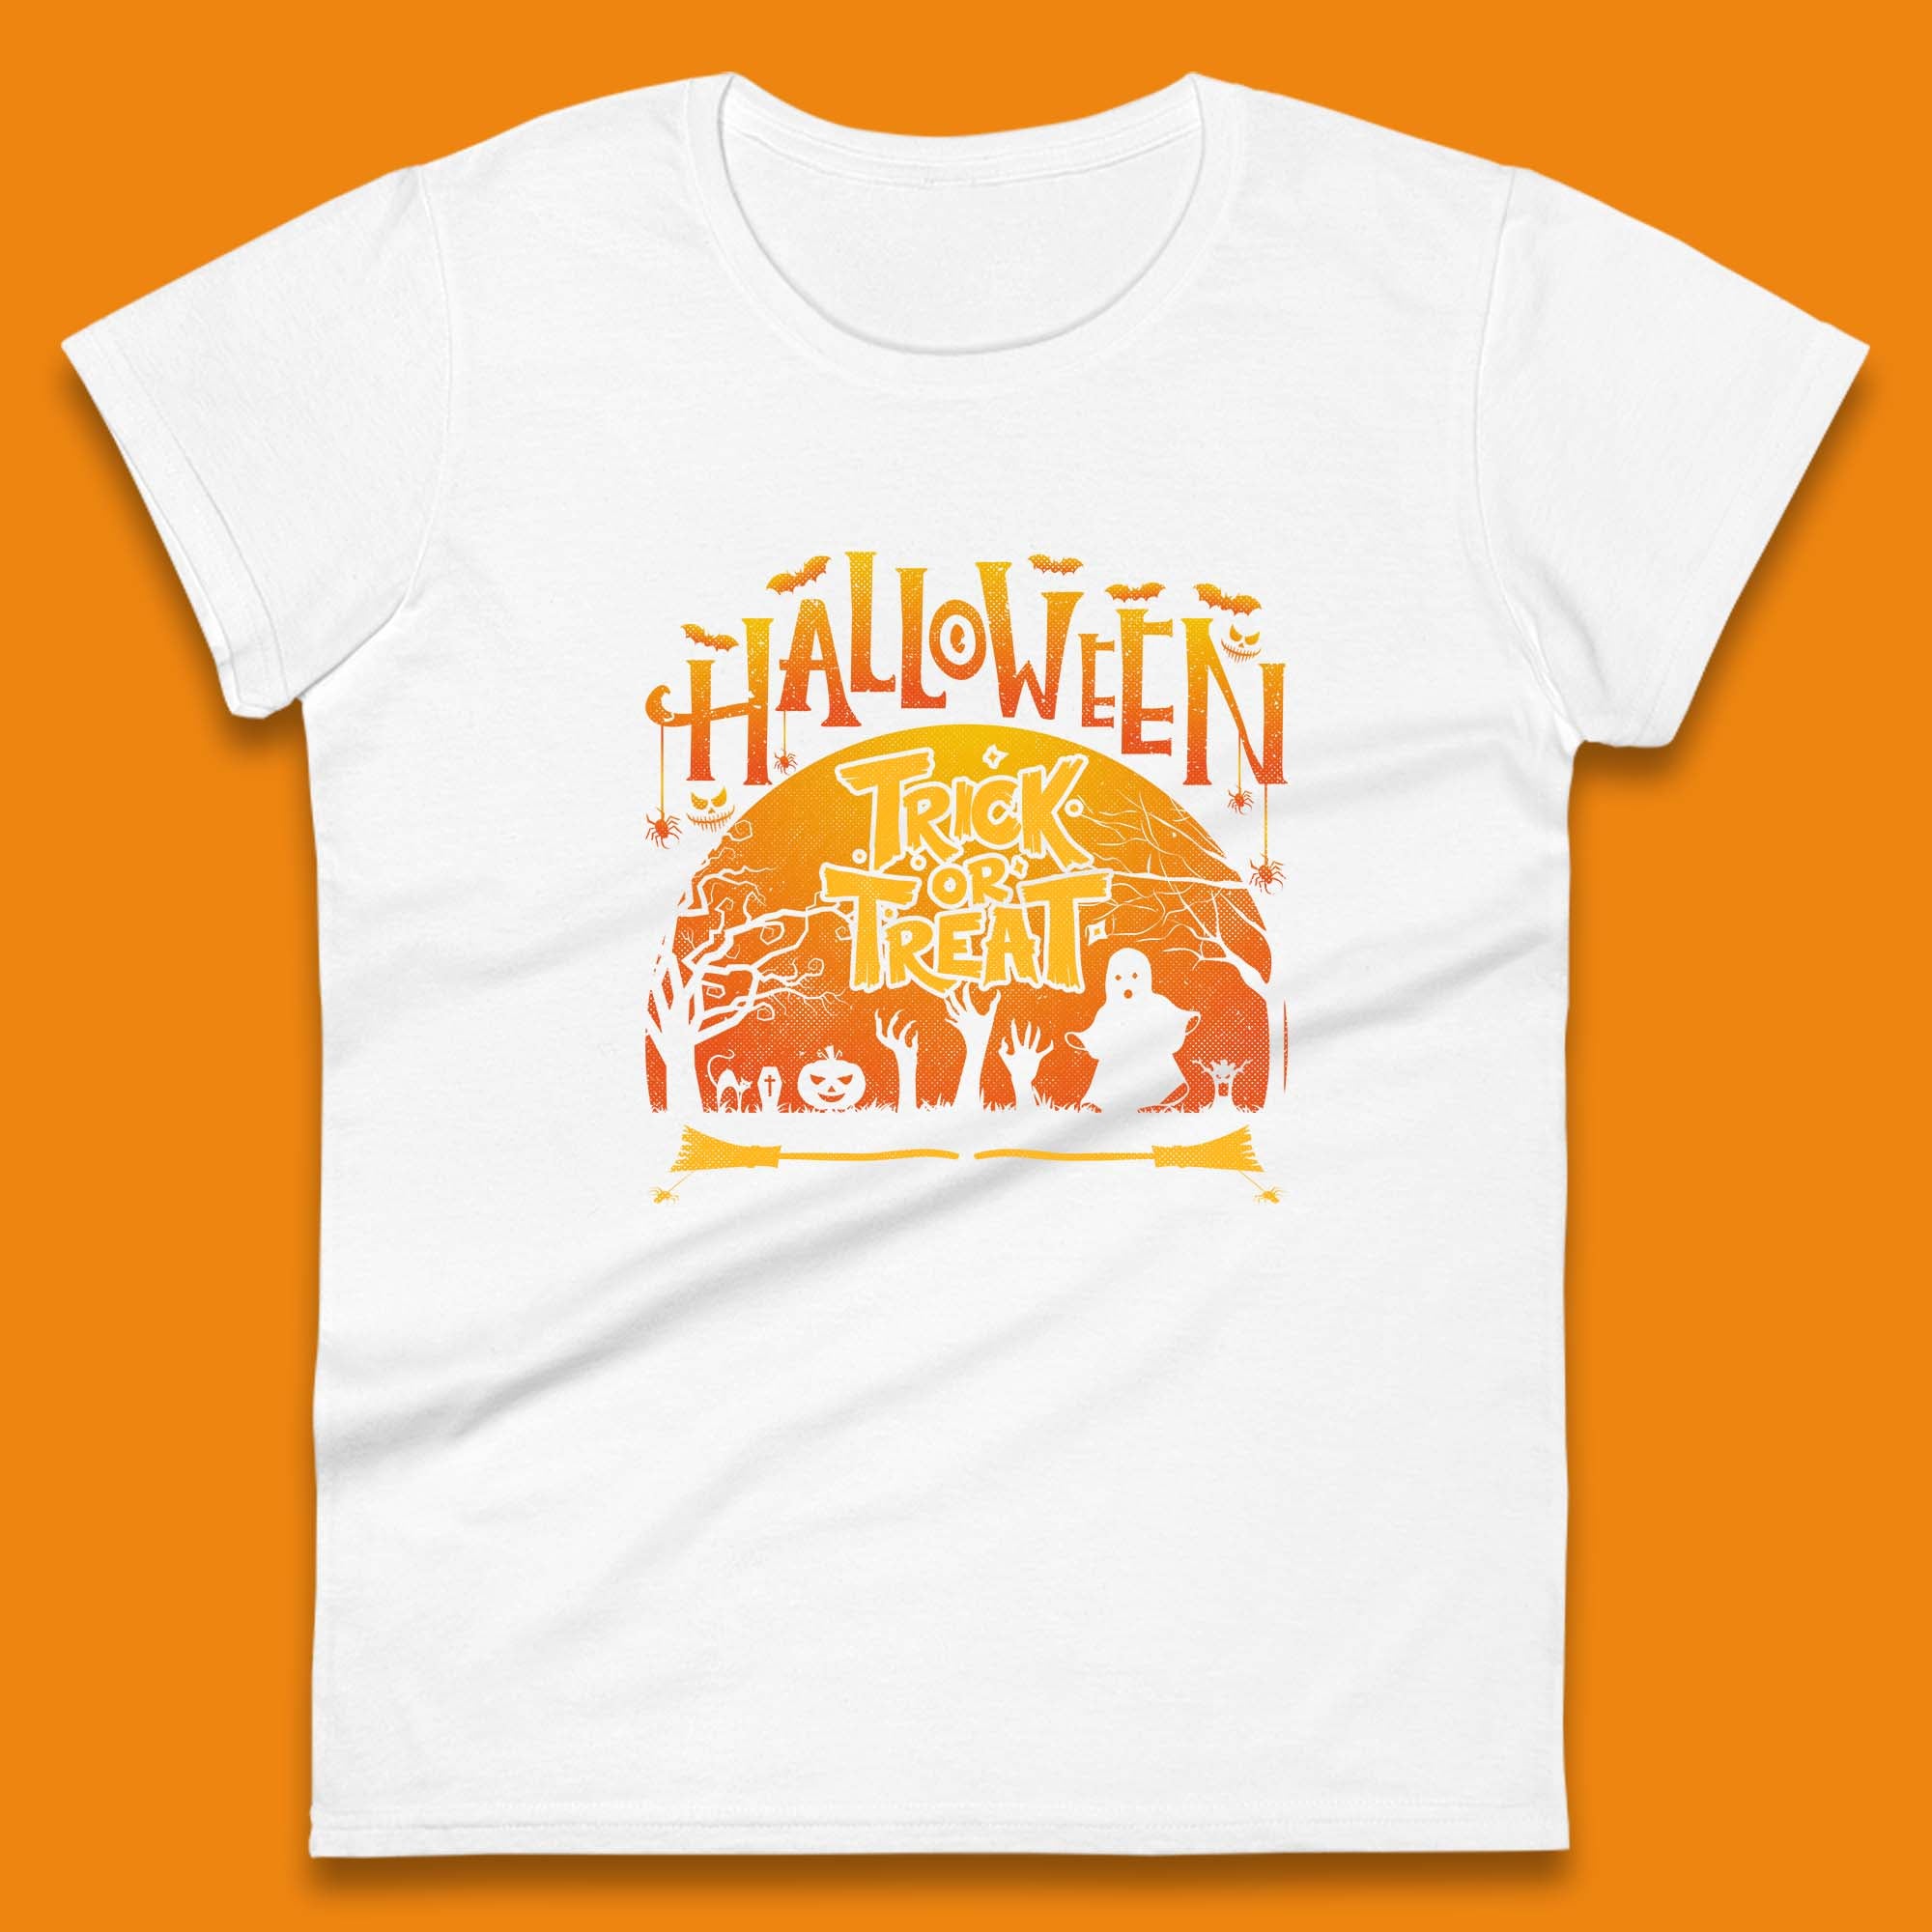 Halloween Trick Or Treat Horror Boo Ghost Creepy Zombie Hands Out Of Graveyard Womens Tee Top